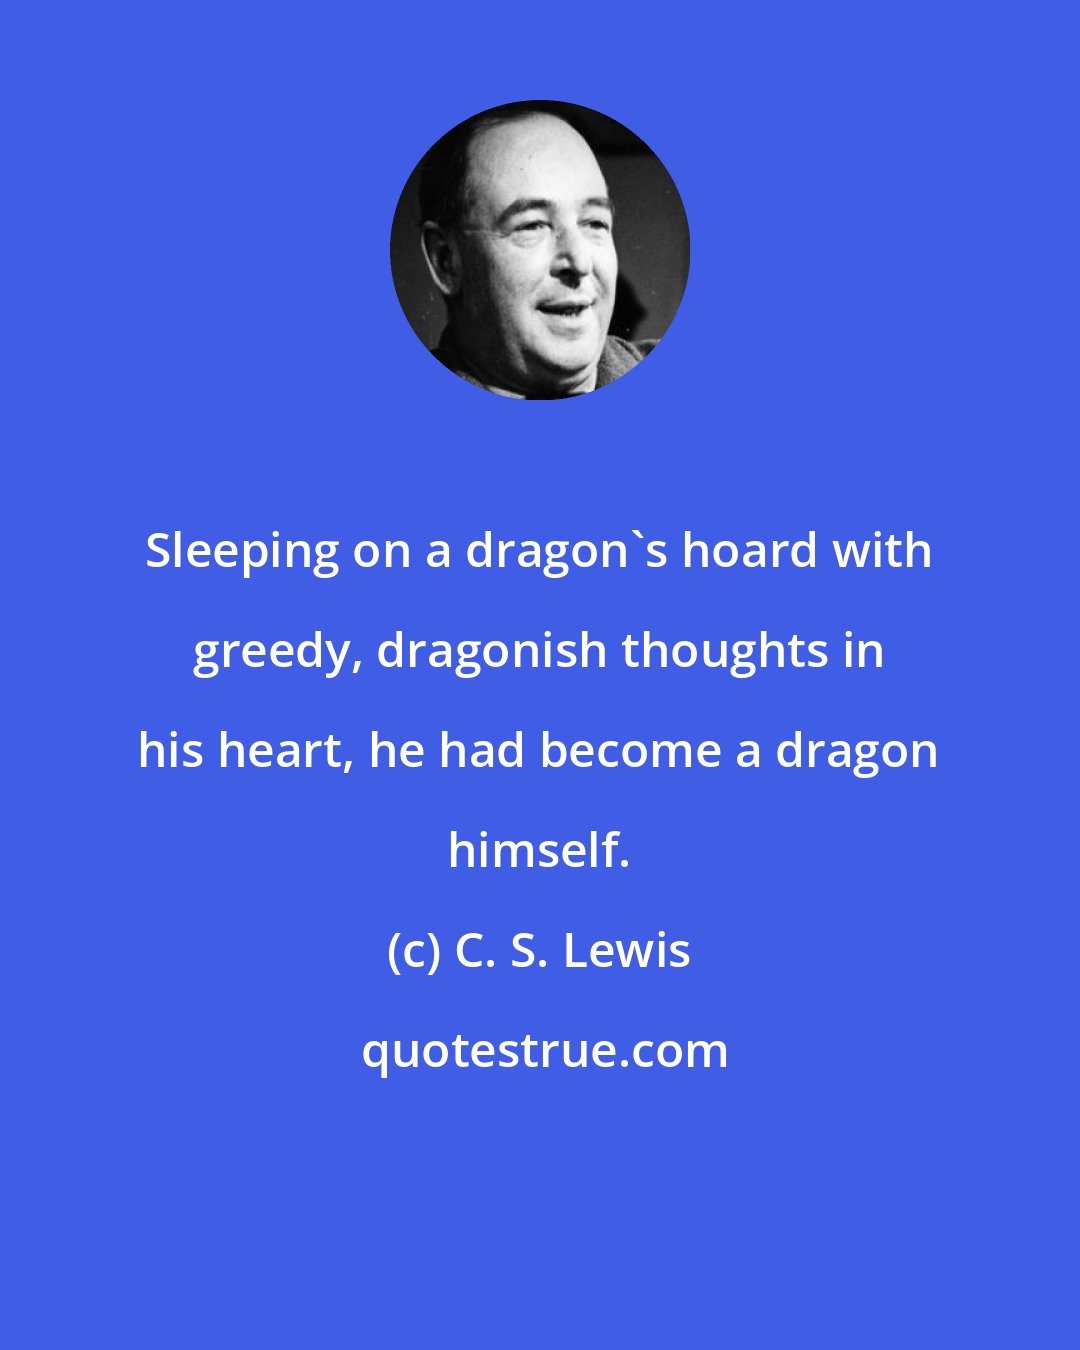 C. S. Lewis: Sleeping on a dragon's hoard with greedy, dragonish thoughts in his heart, he had become a dragon himself.